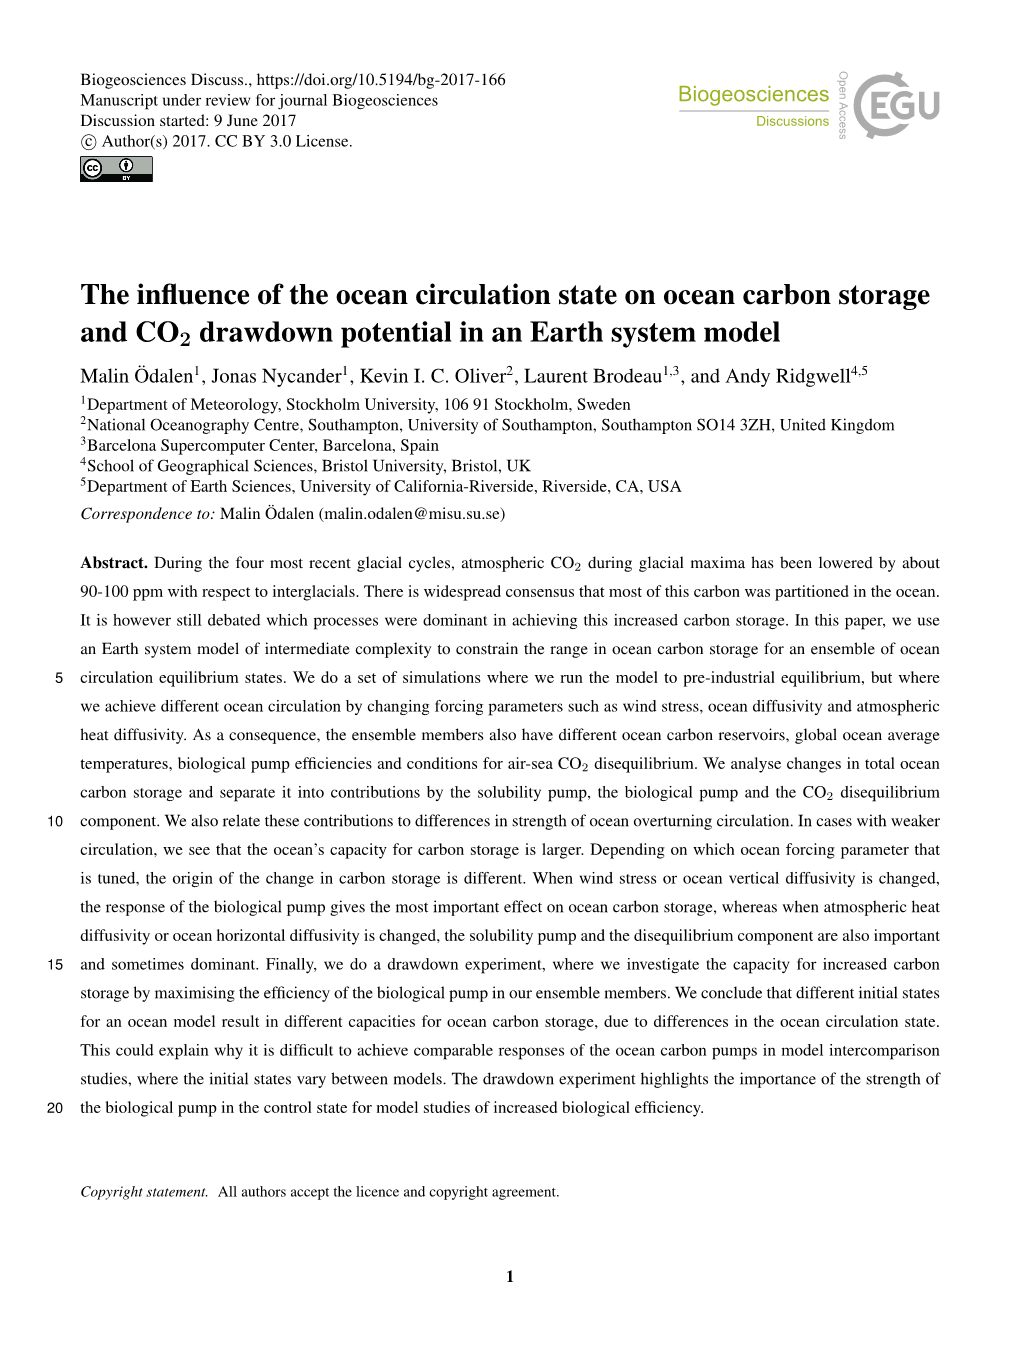 The Influence of the Ocean Circulation State on Ocean Carbon Storage And